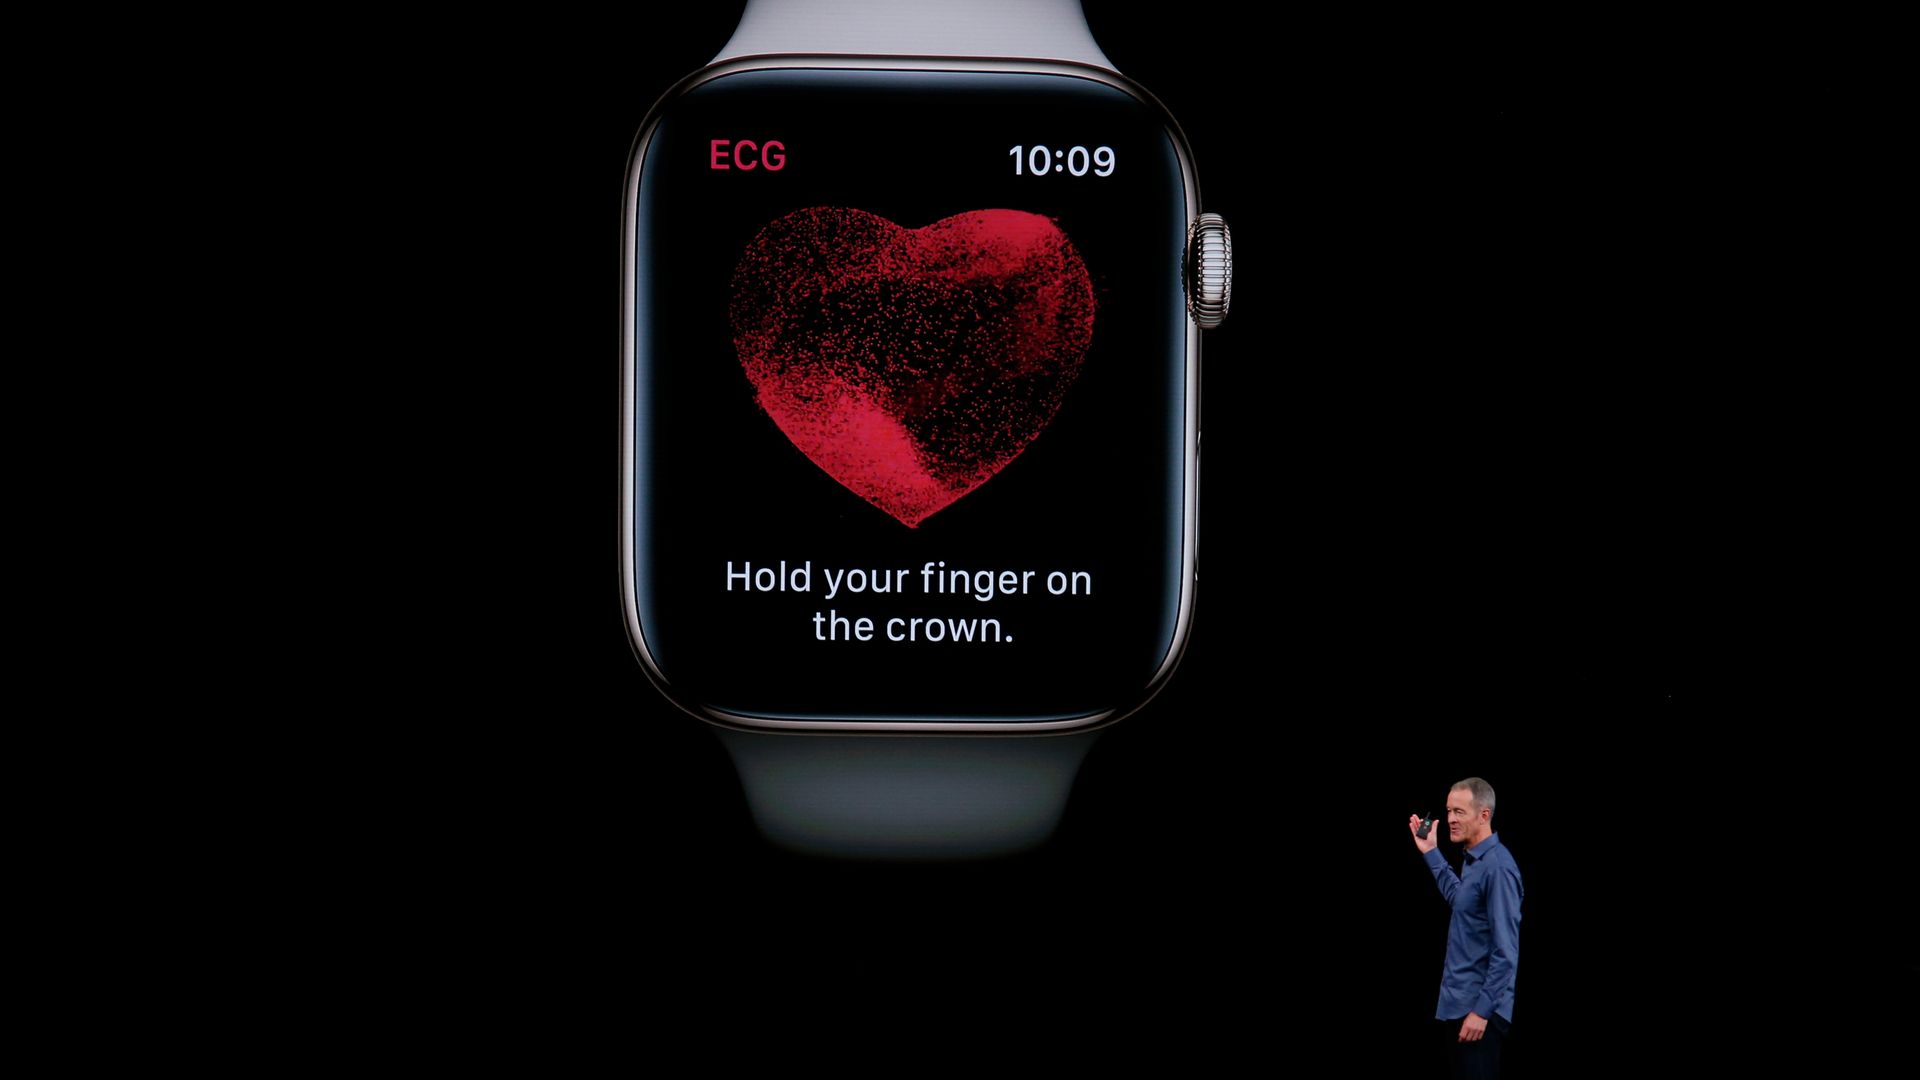 Apple executive presents apple watch on stage